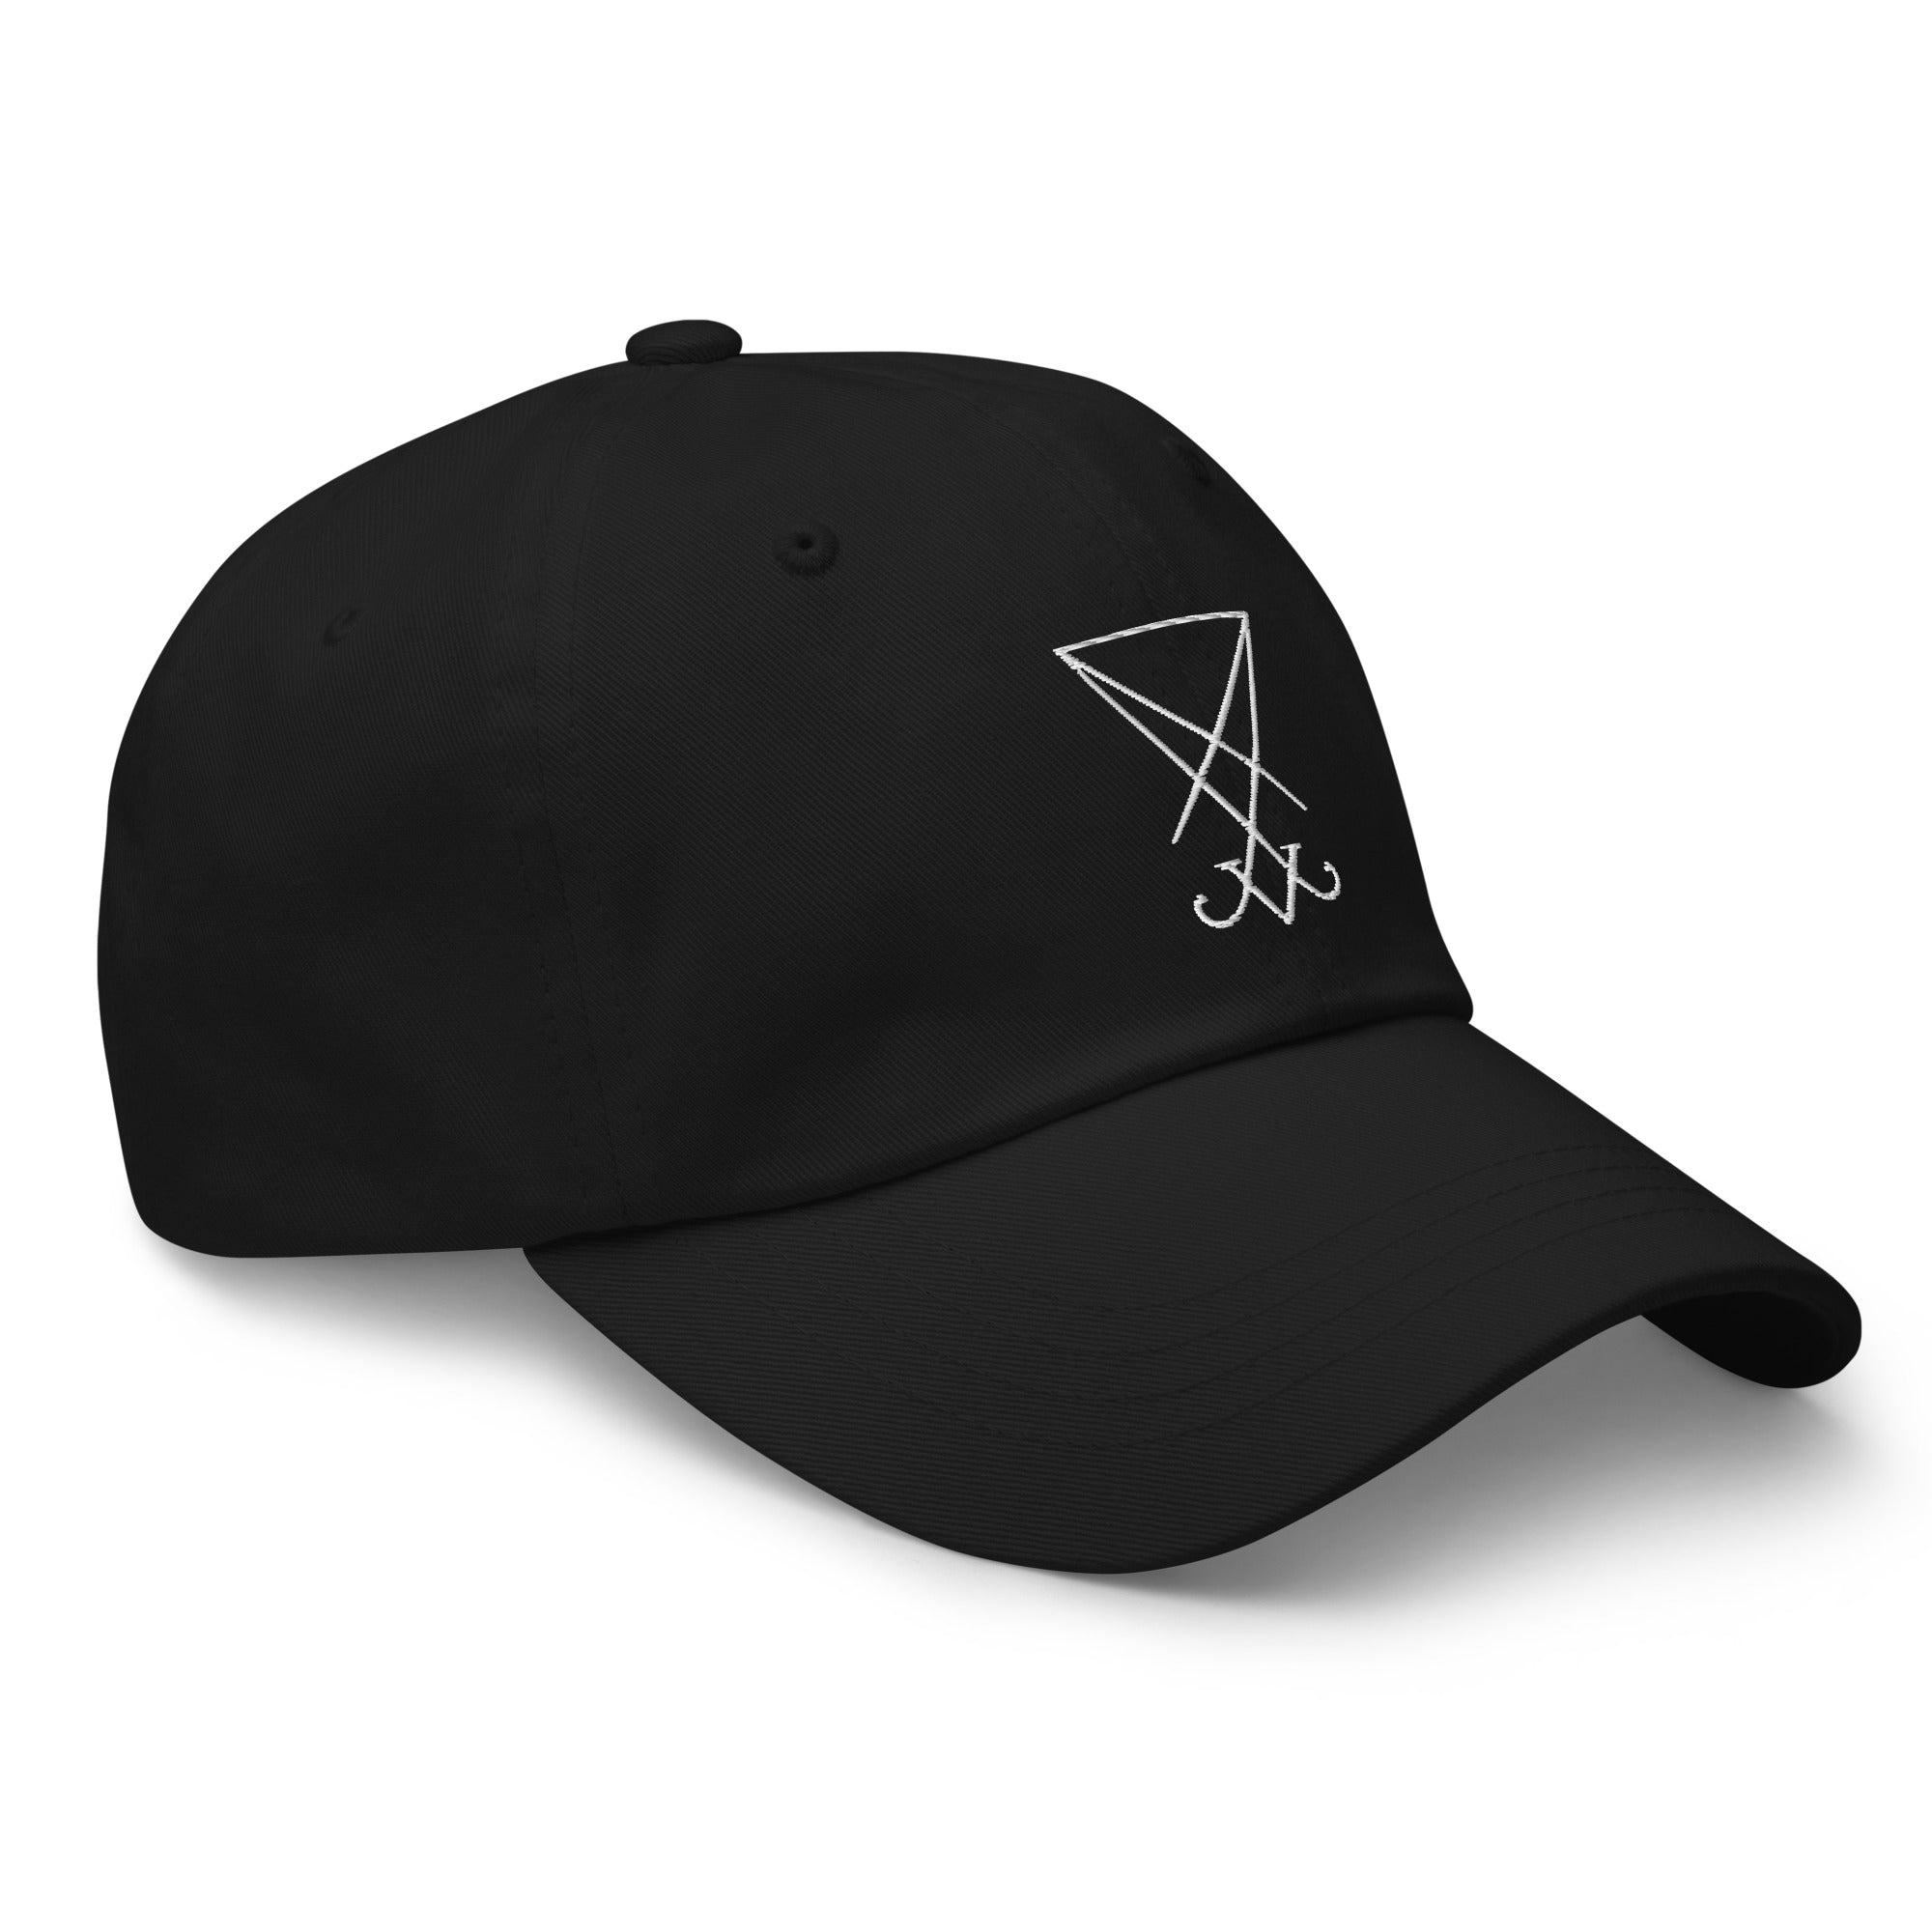 White Thread Sigil of Lucifer Symbol The Seal of Satan Embroidered Baseball Cap Dad hat - Edge of Life Designs